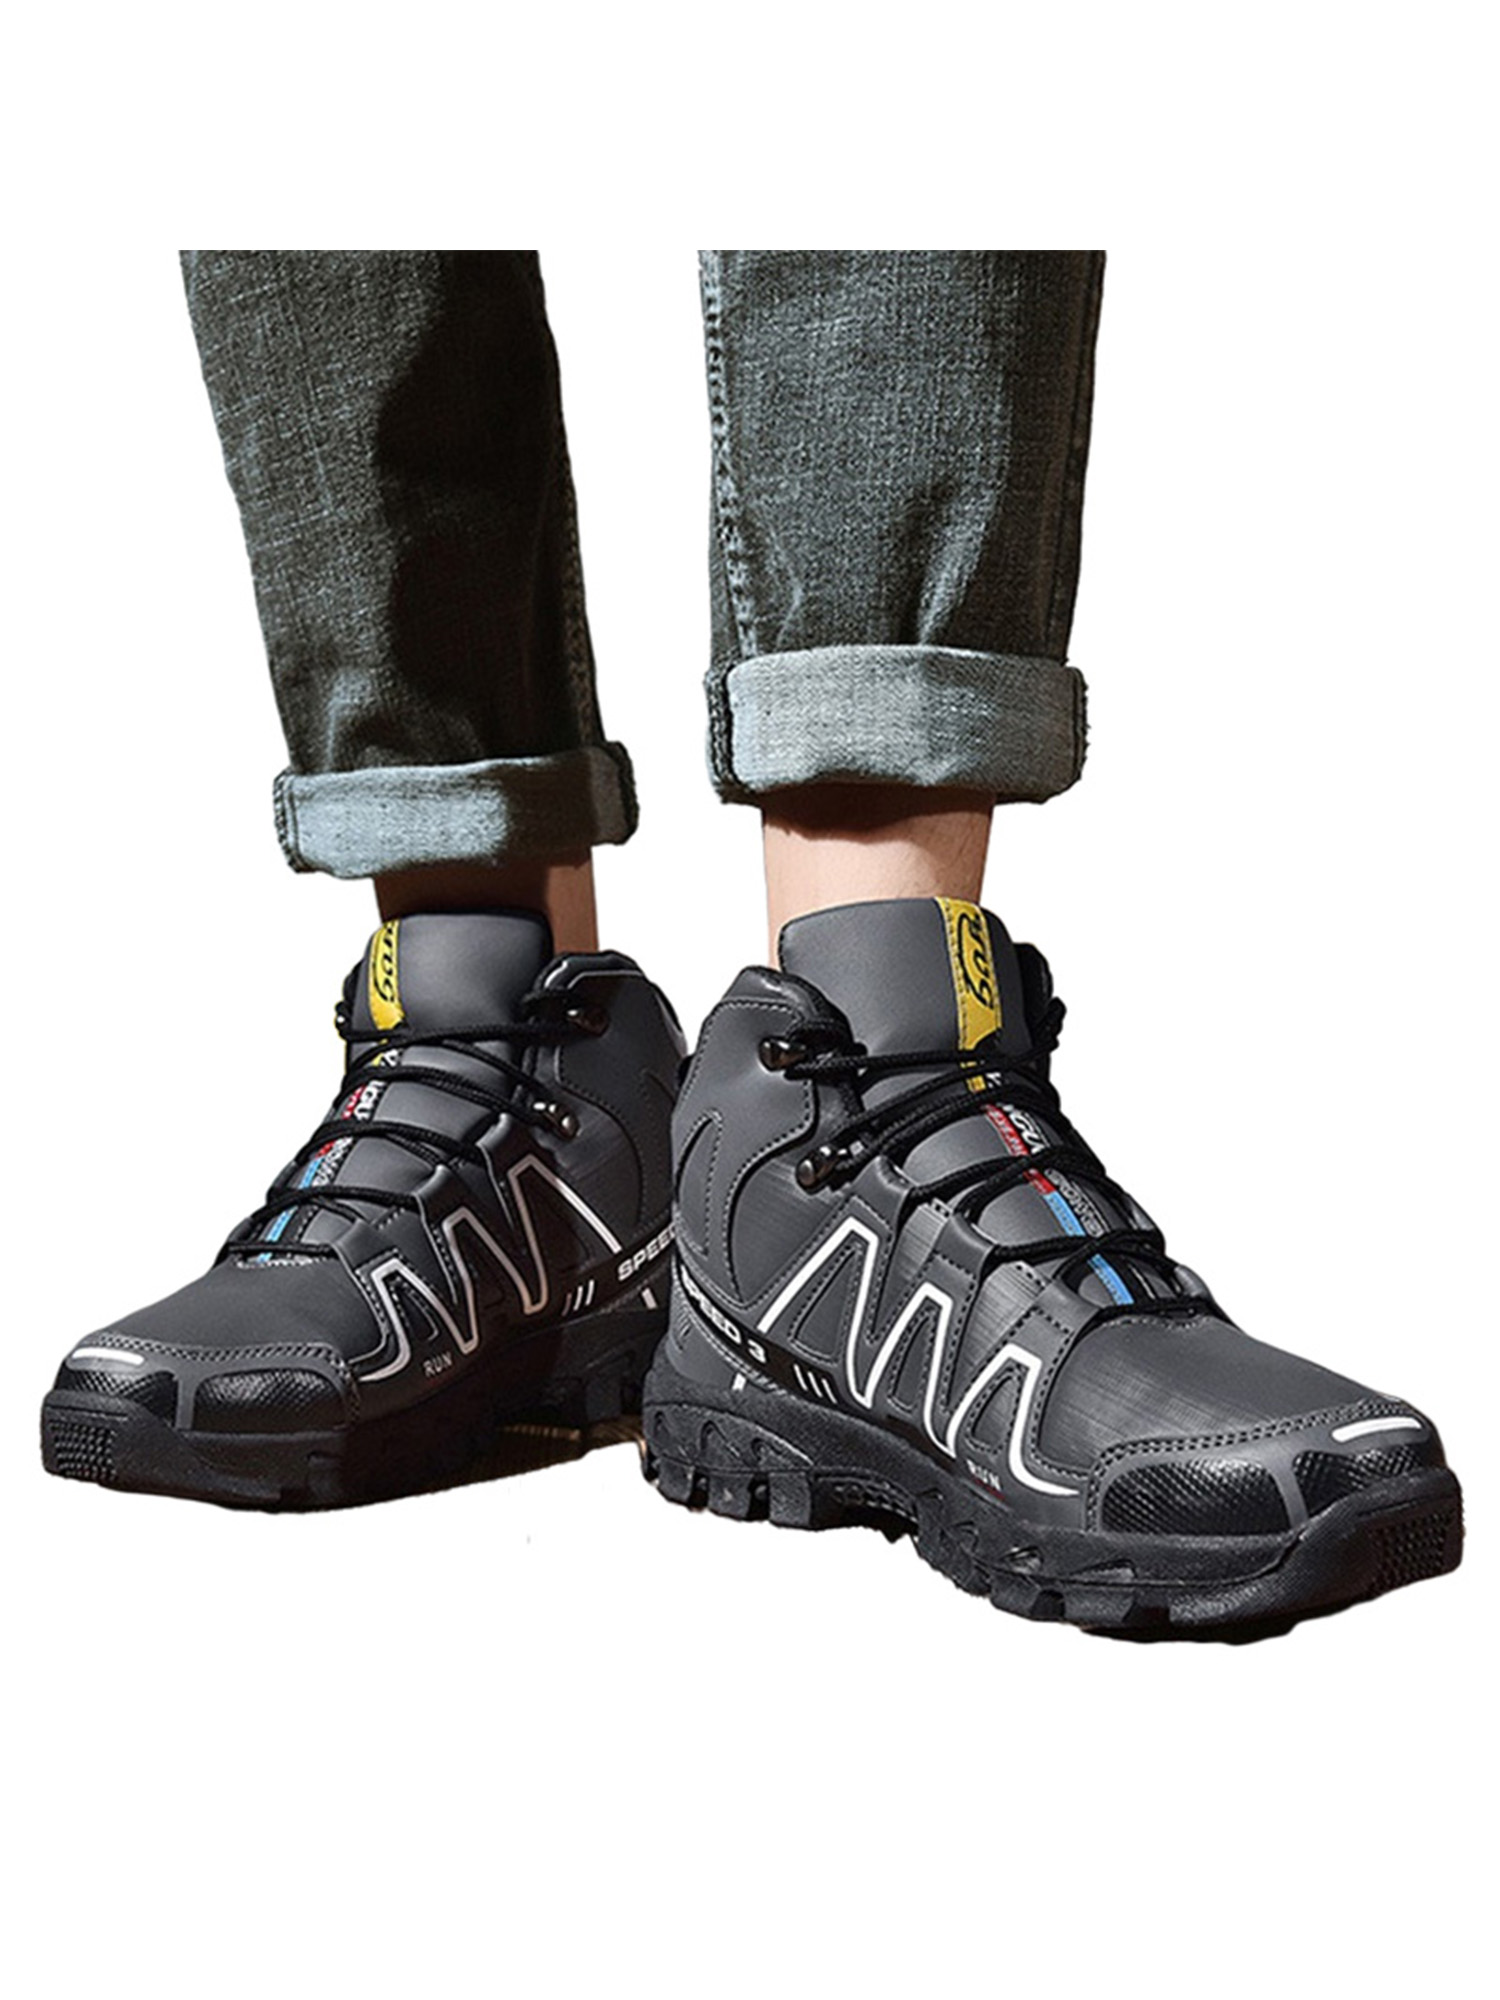 Avamo Mens Leather Steel Toe Cap Safety Work Boots Trainers Lace Up Shoes-Slip Resistant Industrial Construction Shoes - image 3 of 5